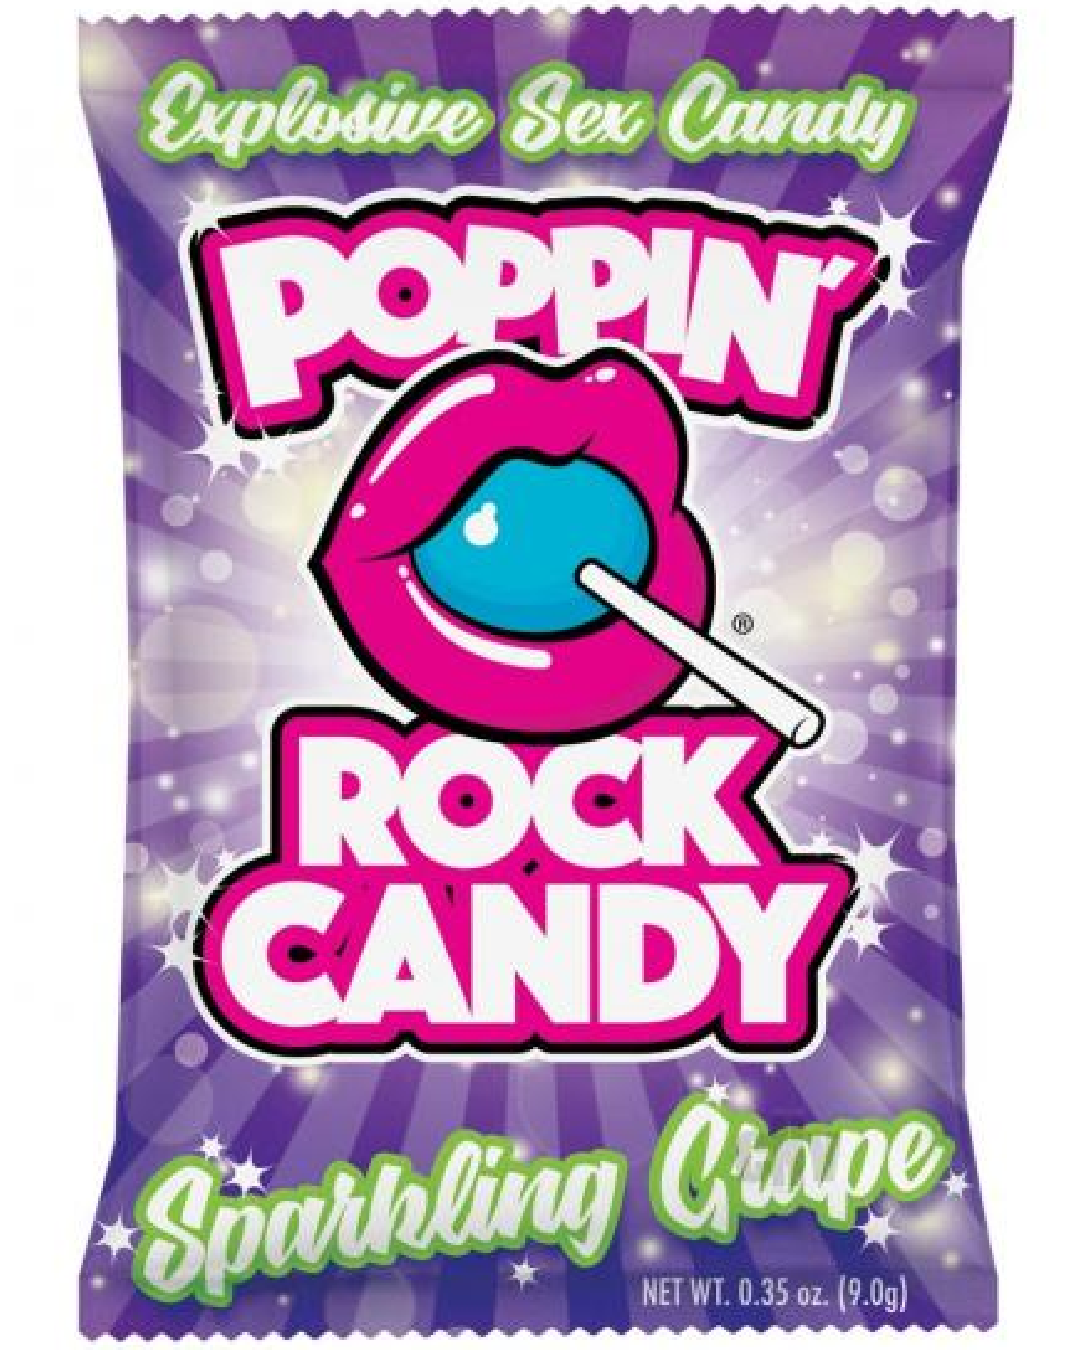 Rock Candy Popping Candy - Sparkling Grape